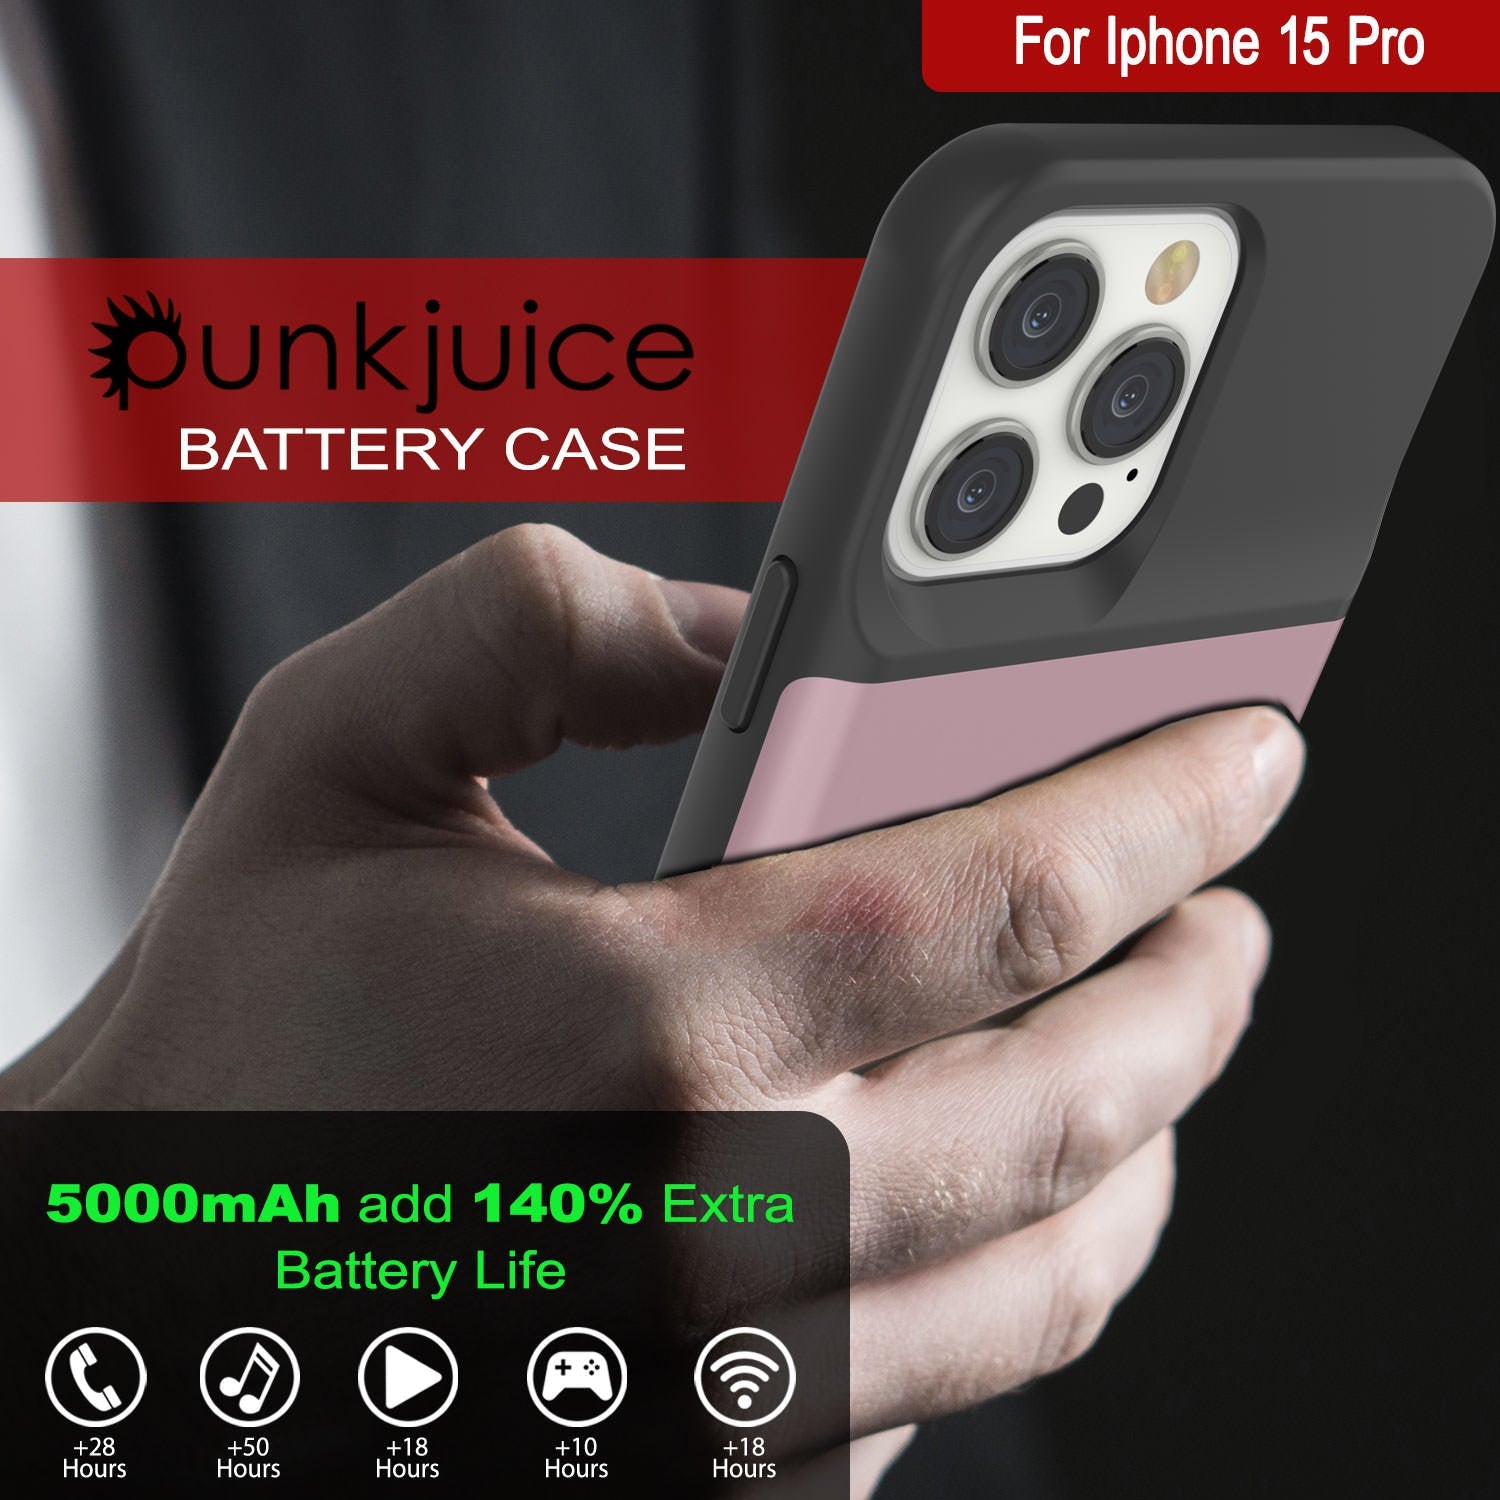 iPhone 15 Pro Battery Case, PunkJuice 5000mAH Fast Charging Power Bank W/ Screen Protector | [Rose-Gold]